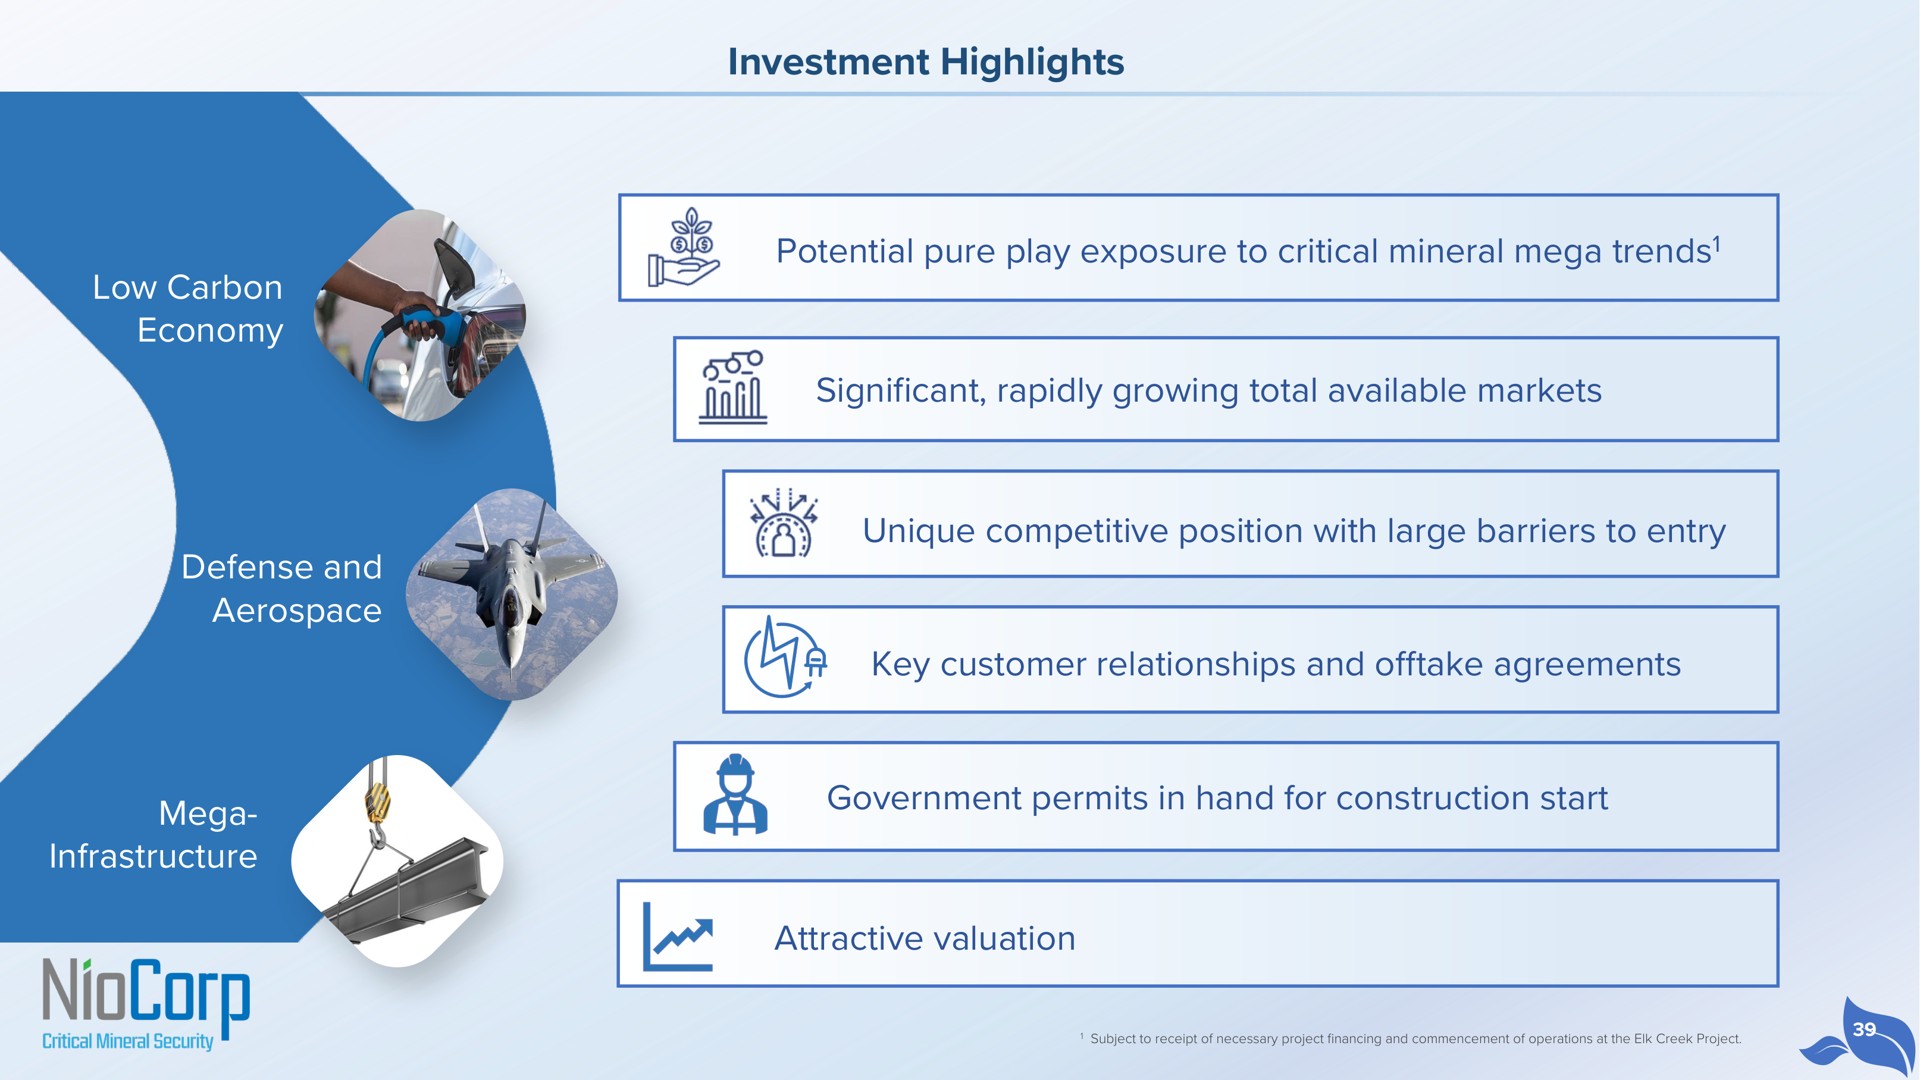 low carbon economy defense and infrastructure investment highlights potential pure play exposure to critical mineral trends significant rapidly growing total available markets unique competitive position with large barriers to entry key customer relationships and offtake agreements government permits in hand for construction start attractive valuation trends ama a net | NioCorp